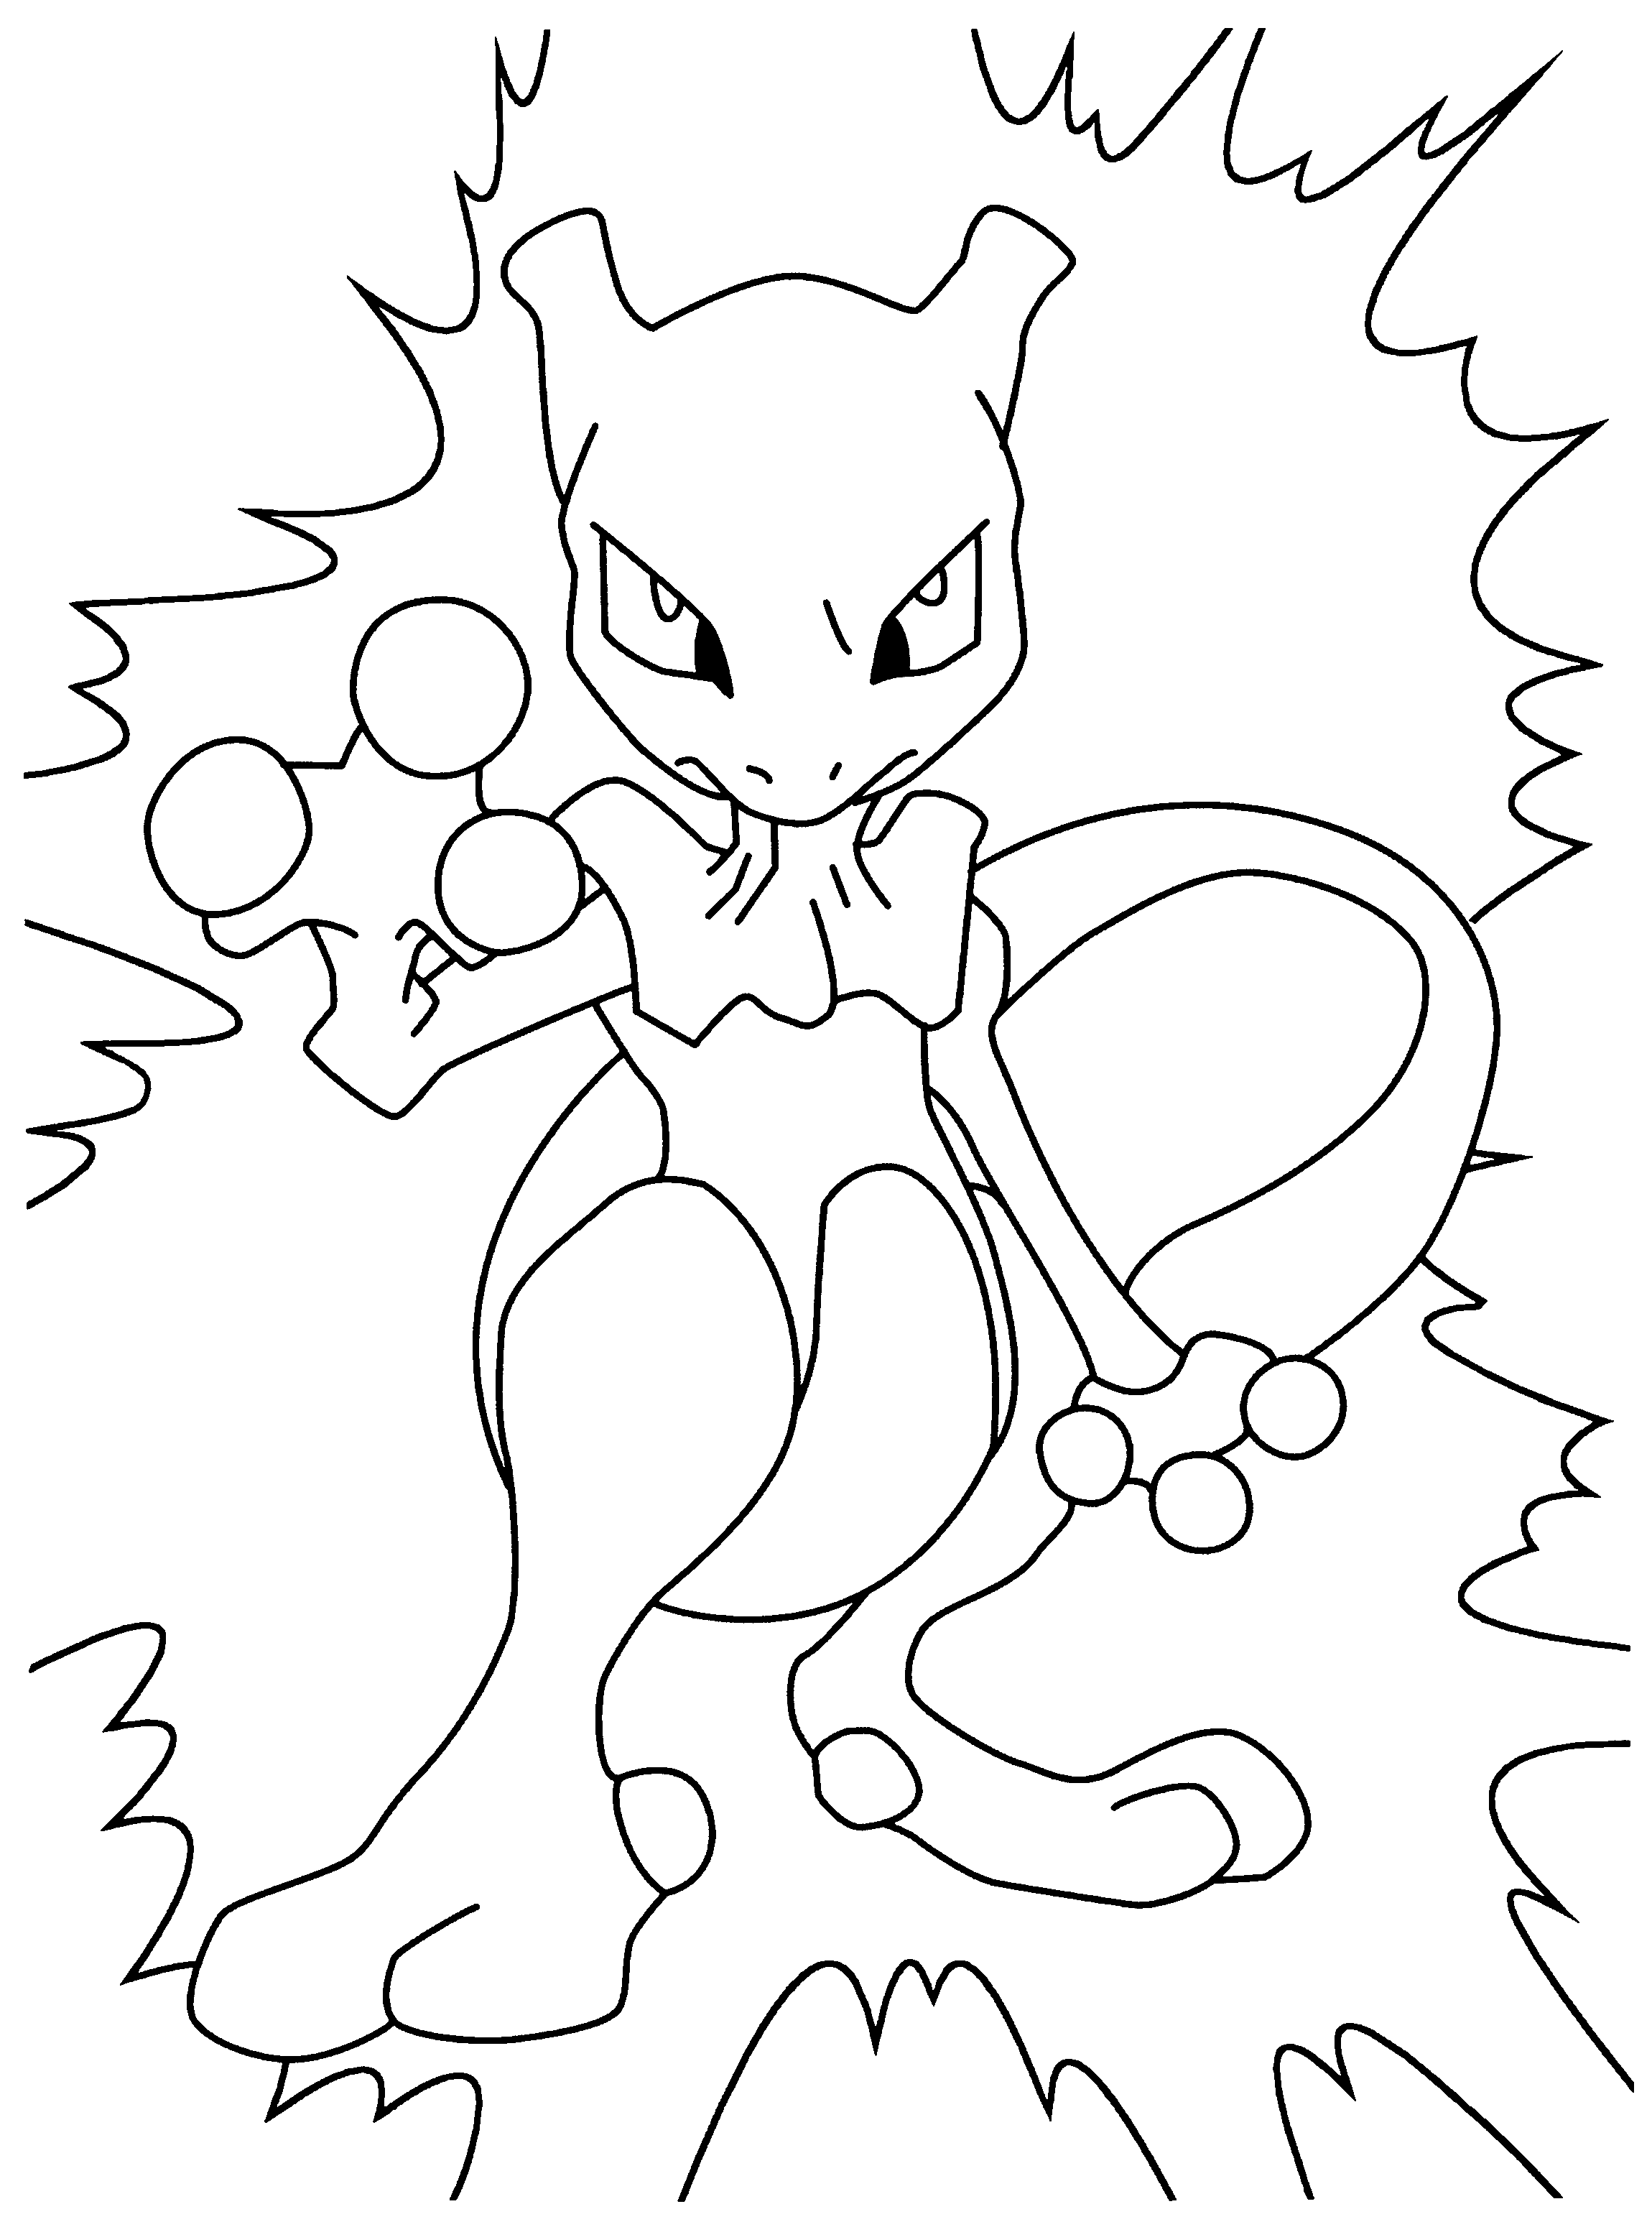 pokemon colouring pages online free pokemon coloring pages join your favorite pokemon on an pokemon pages online colouring free 